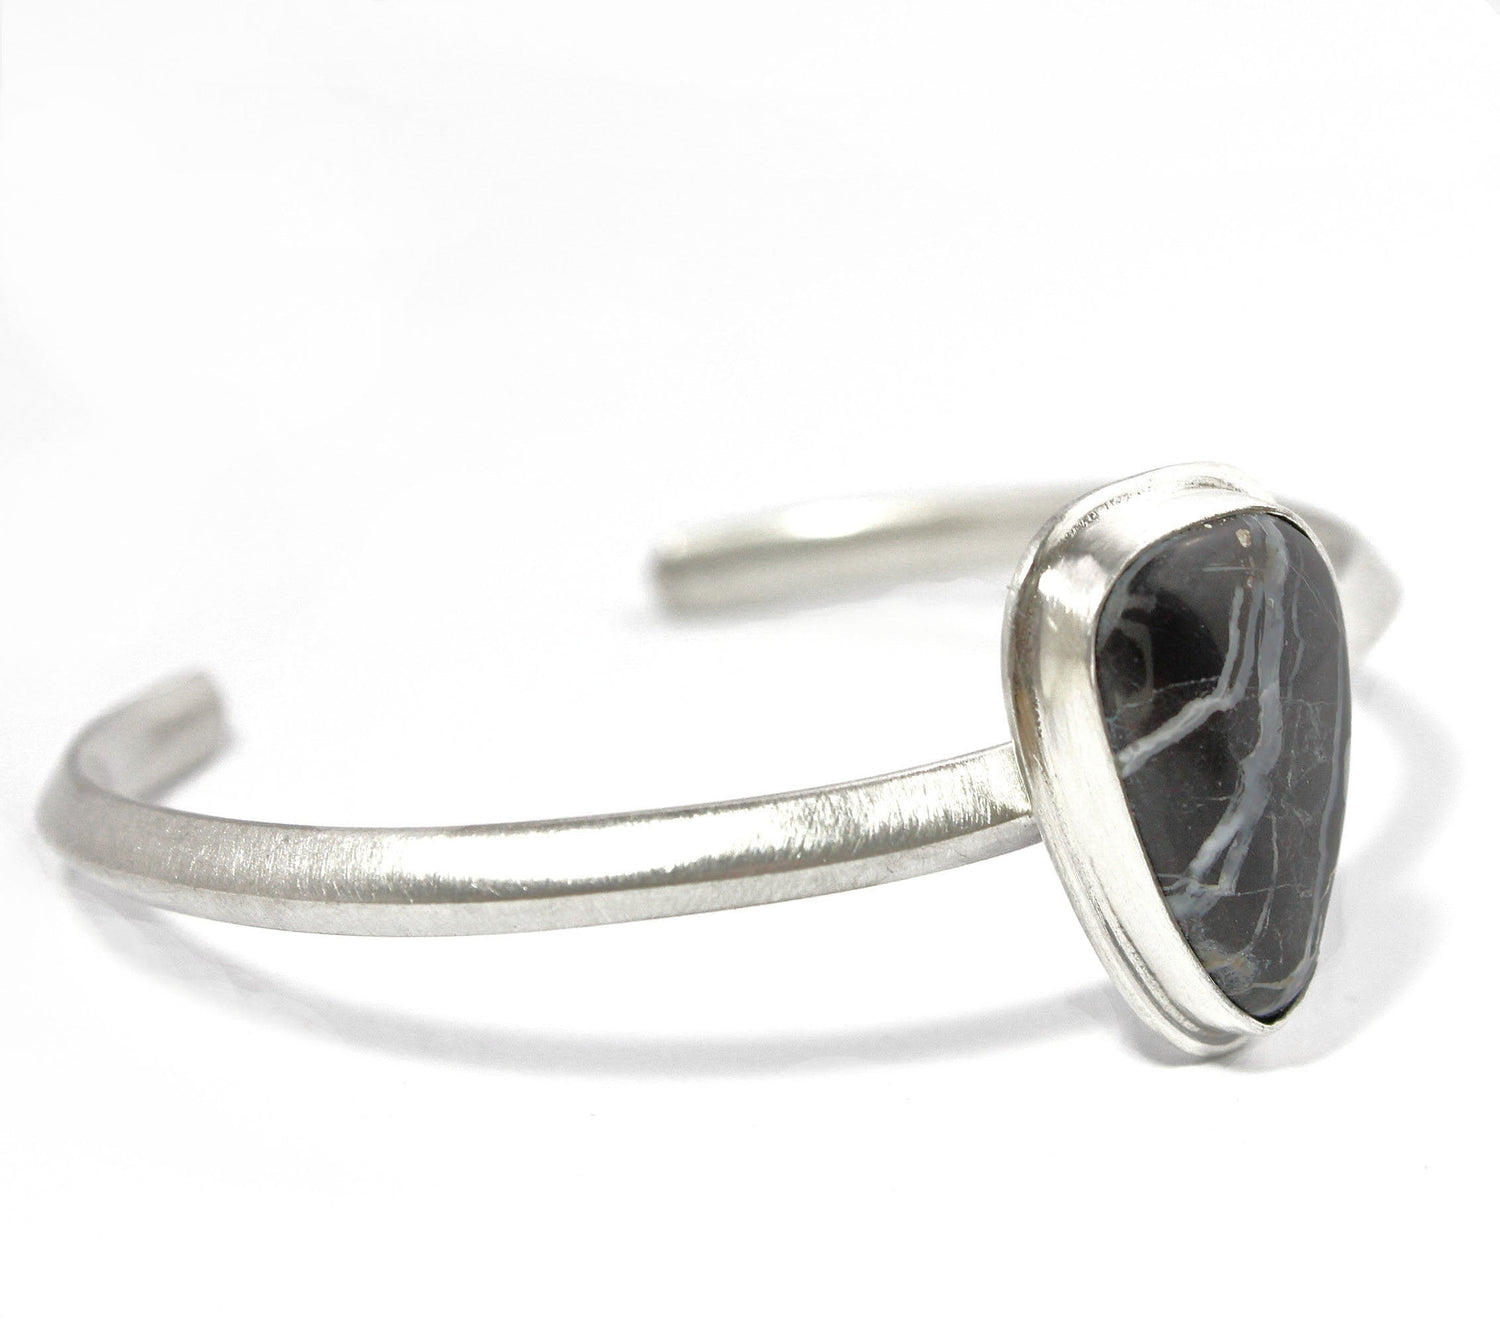 Black and White Sterling Silver Cuff Bracelet